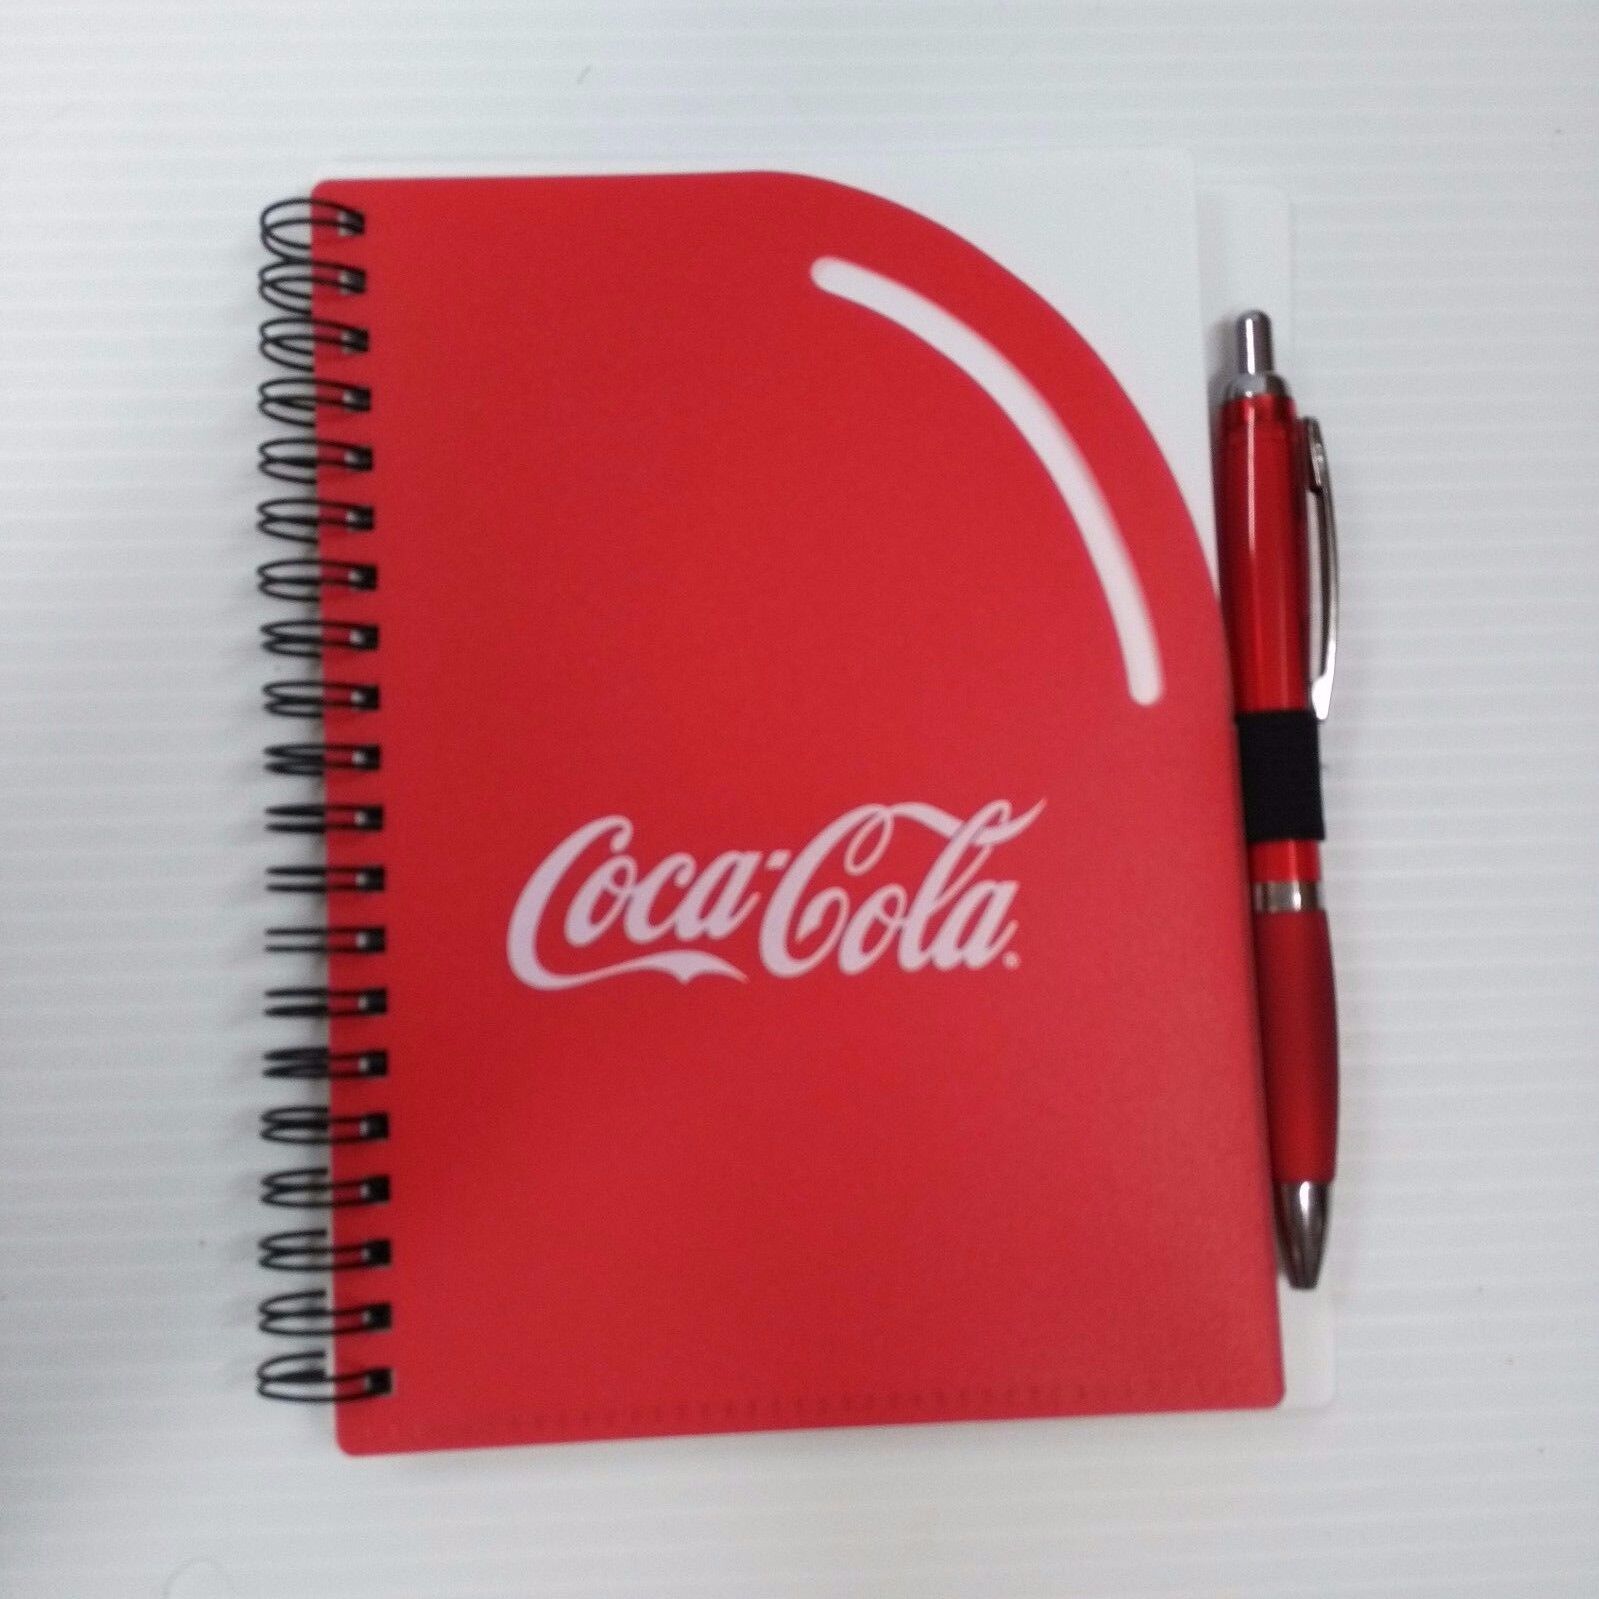 Coca-Cola Spiral Notebook with Pen Red